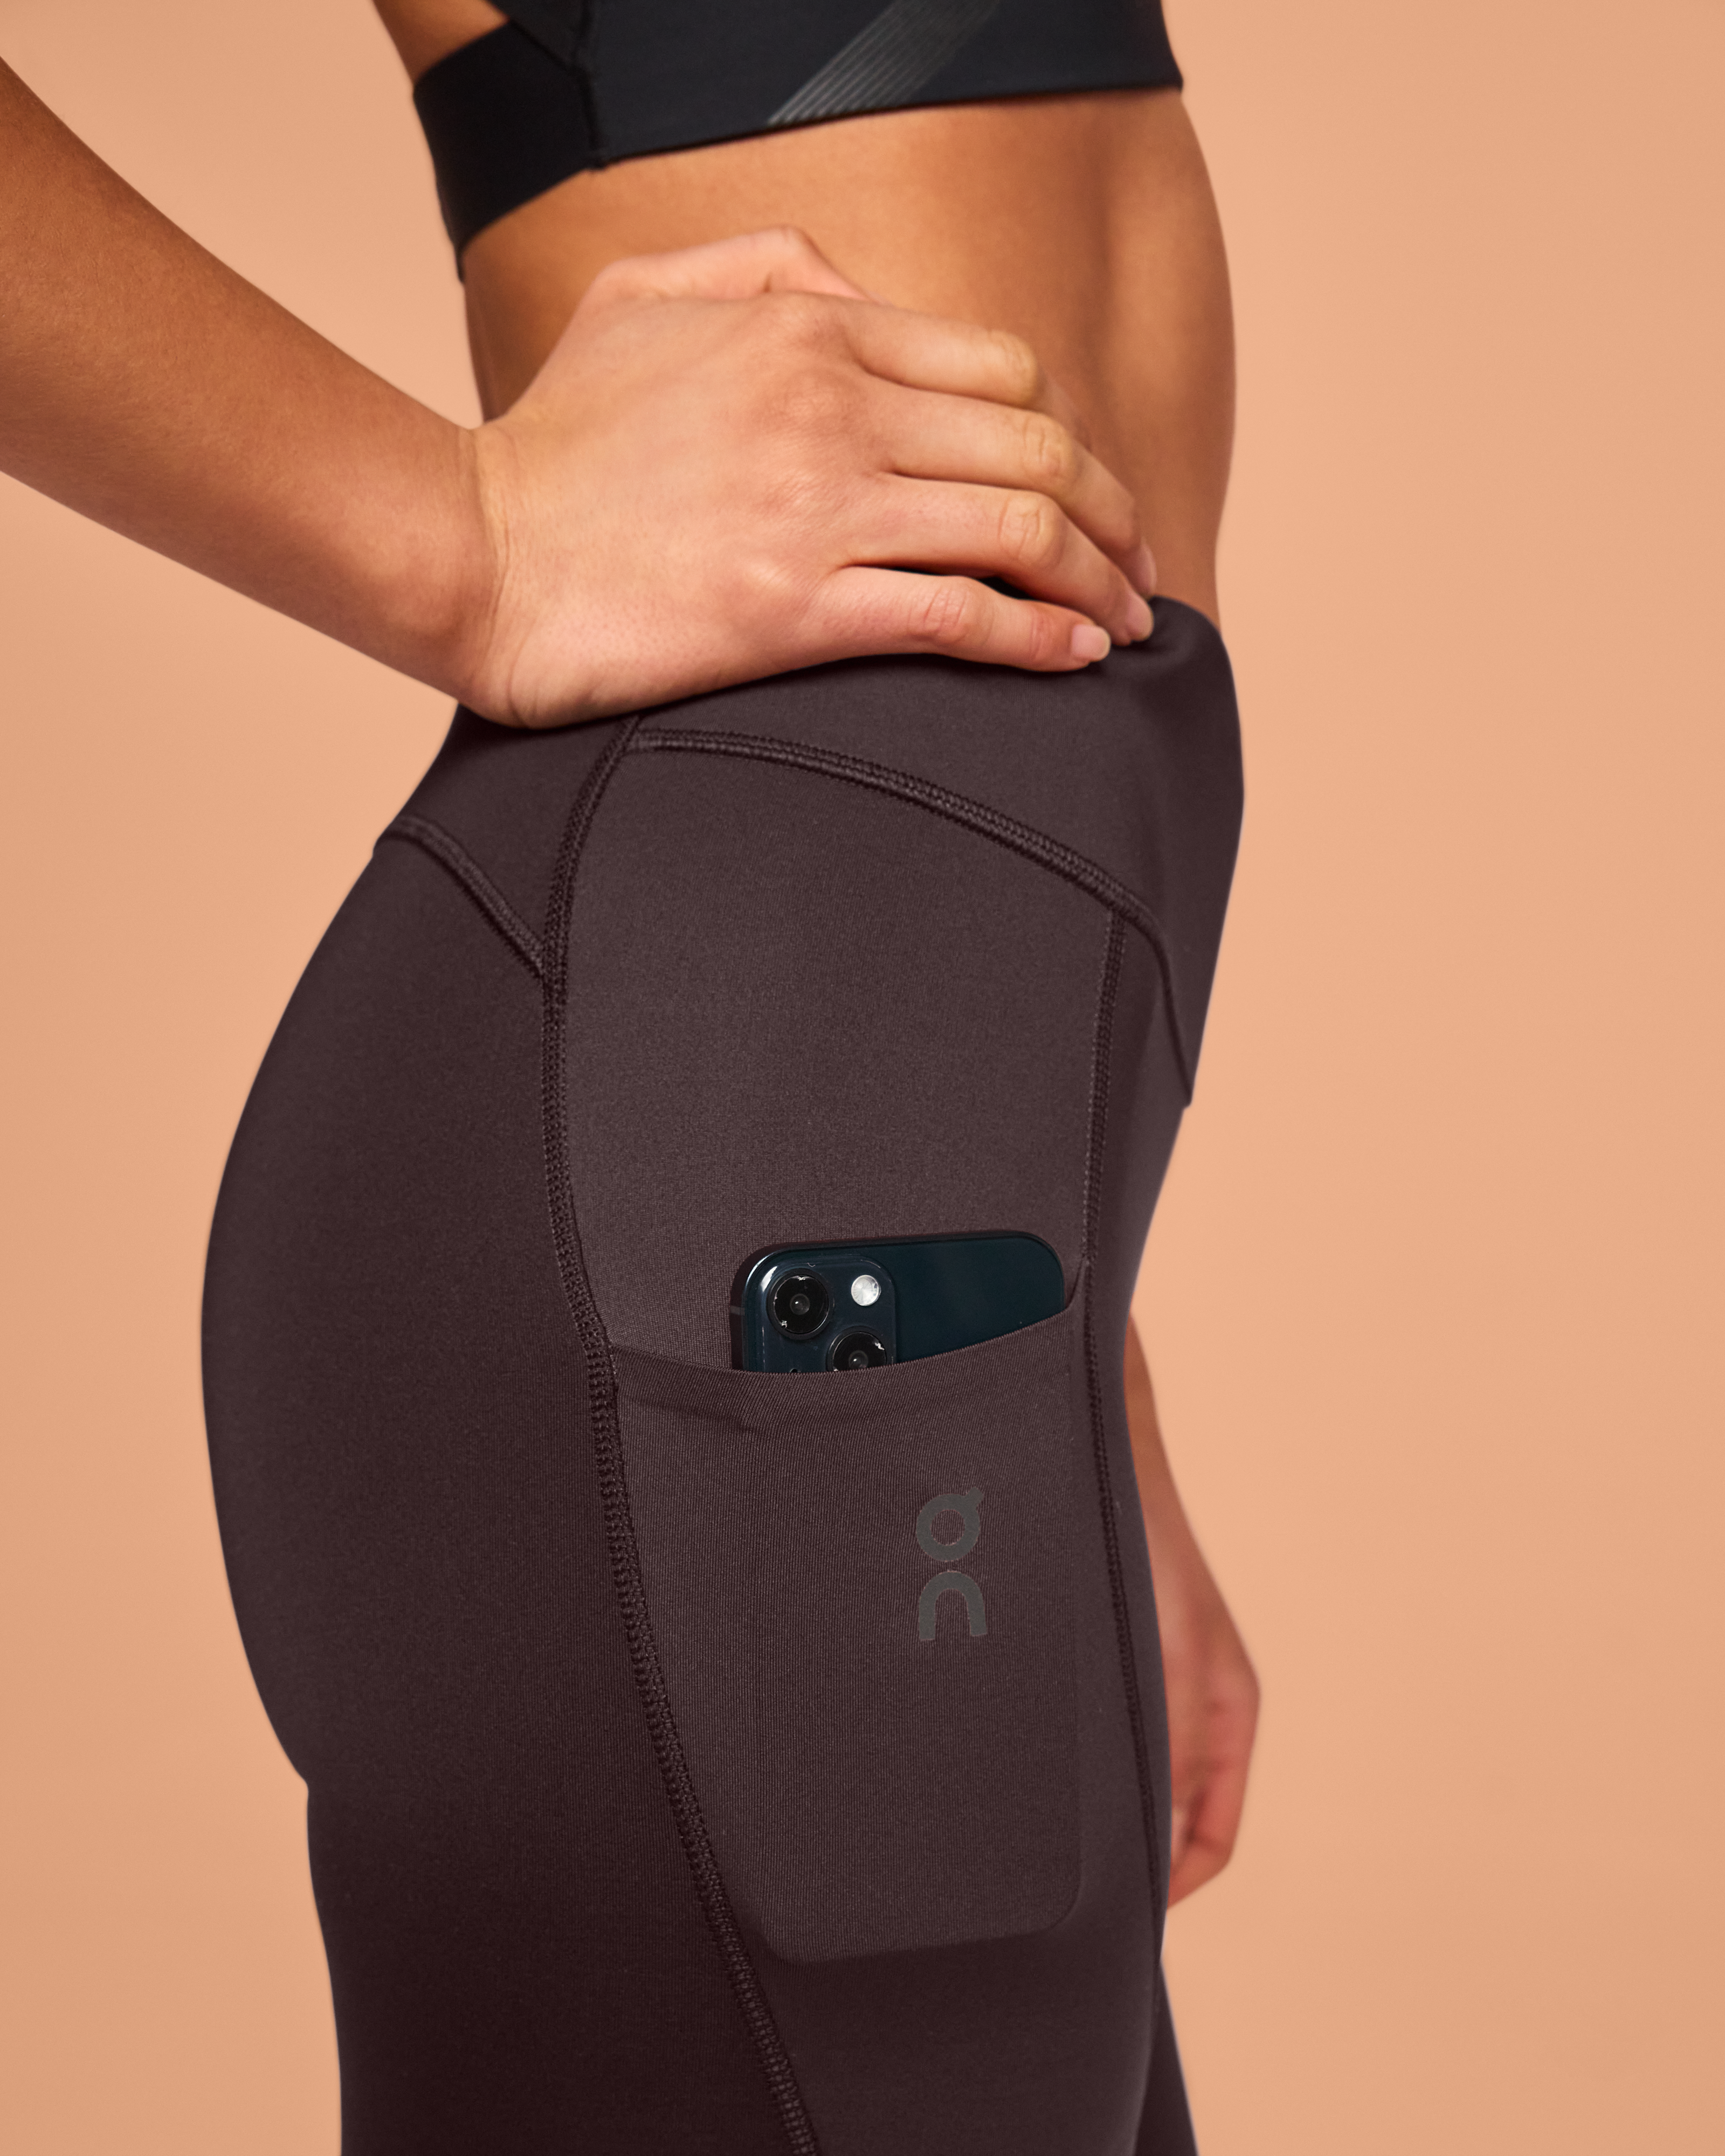 Performance Tights 7/8: Women's cropped running tights with phone pocket